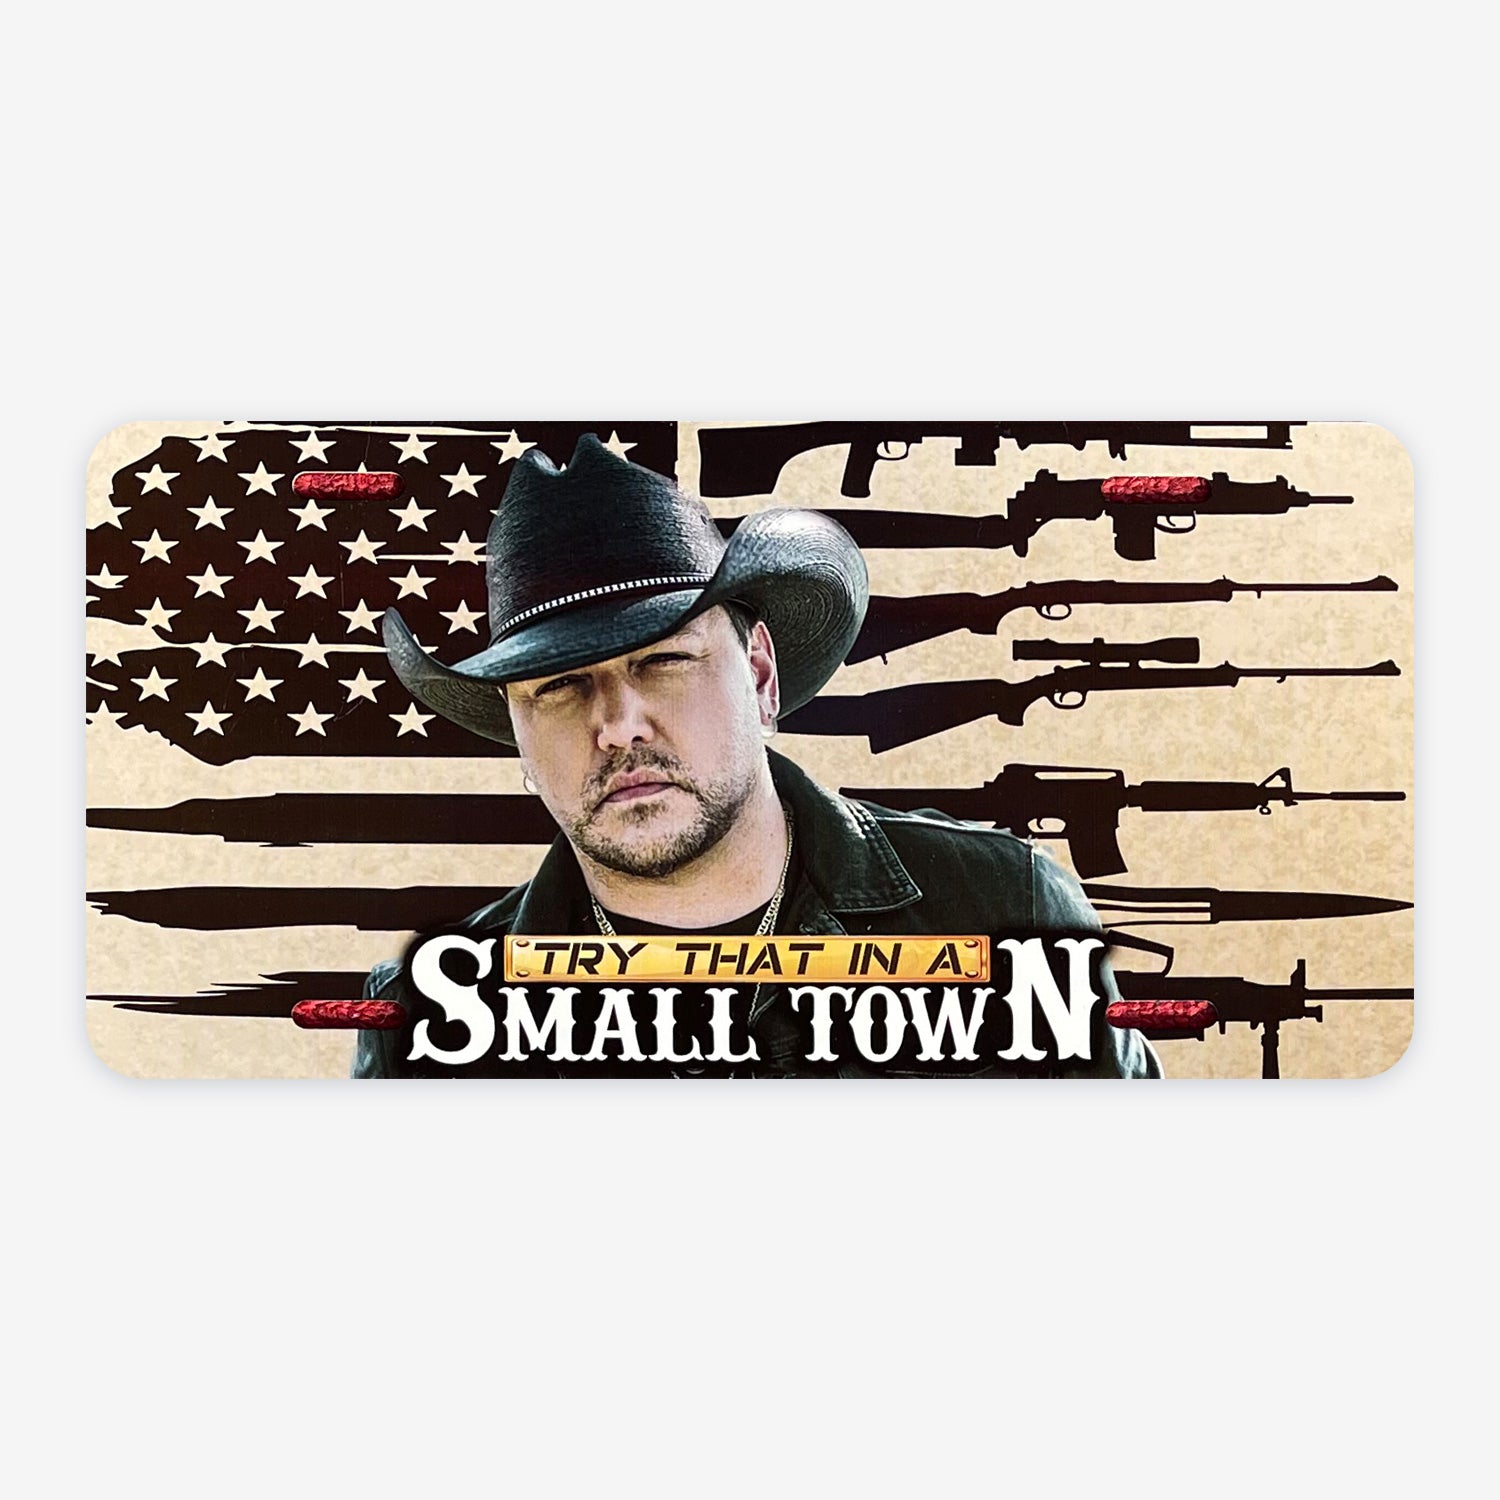 Try That In A Small Town - Jason Aldean - License Plate